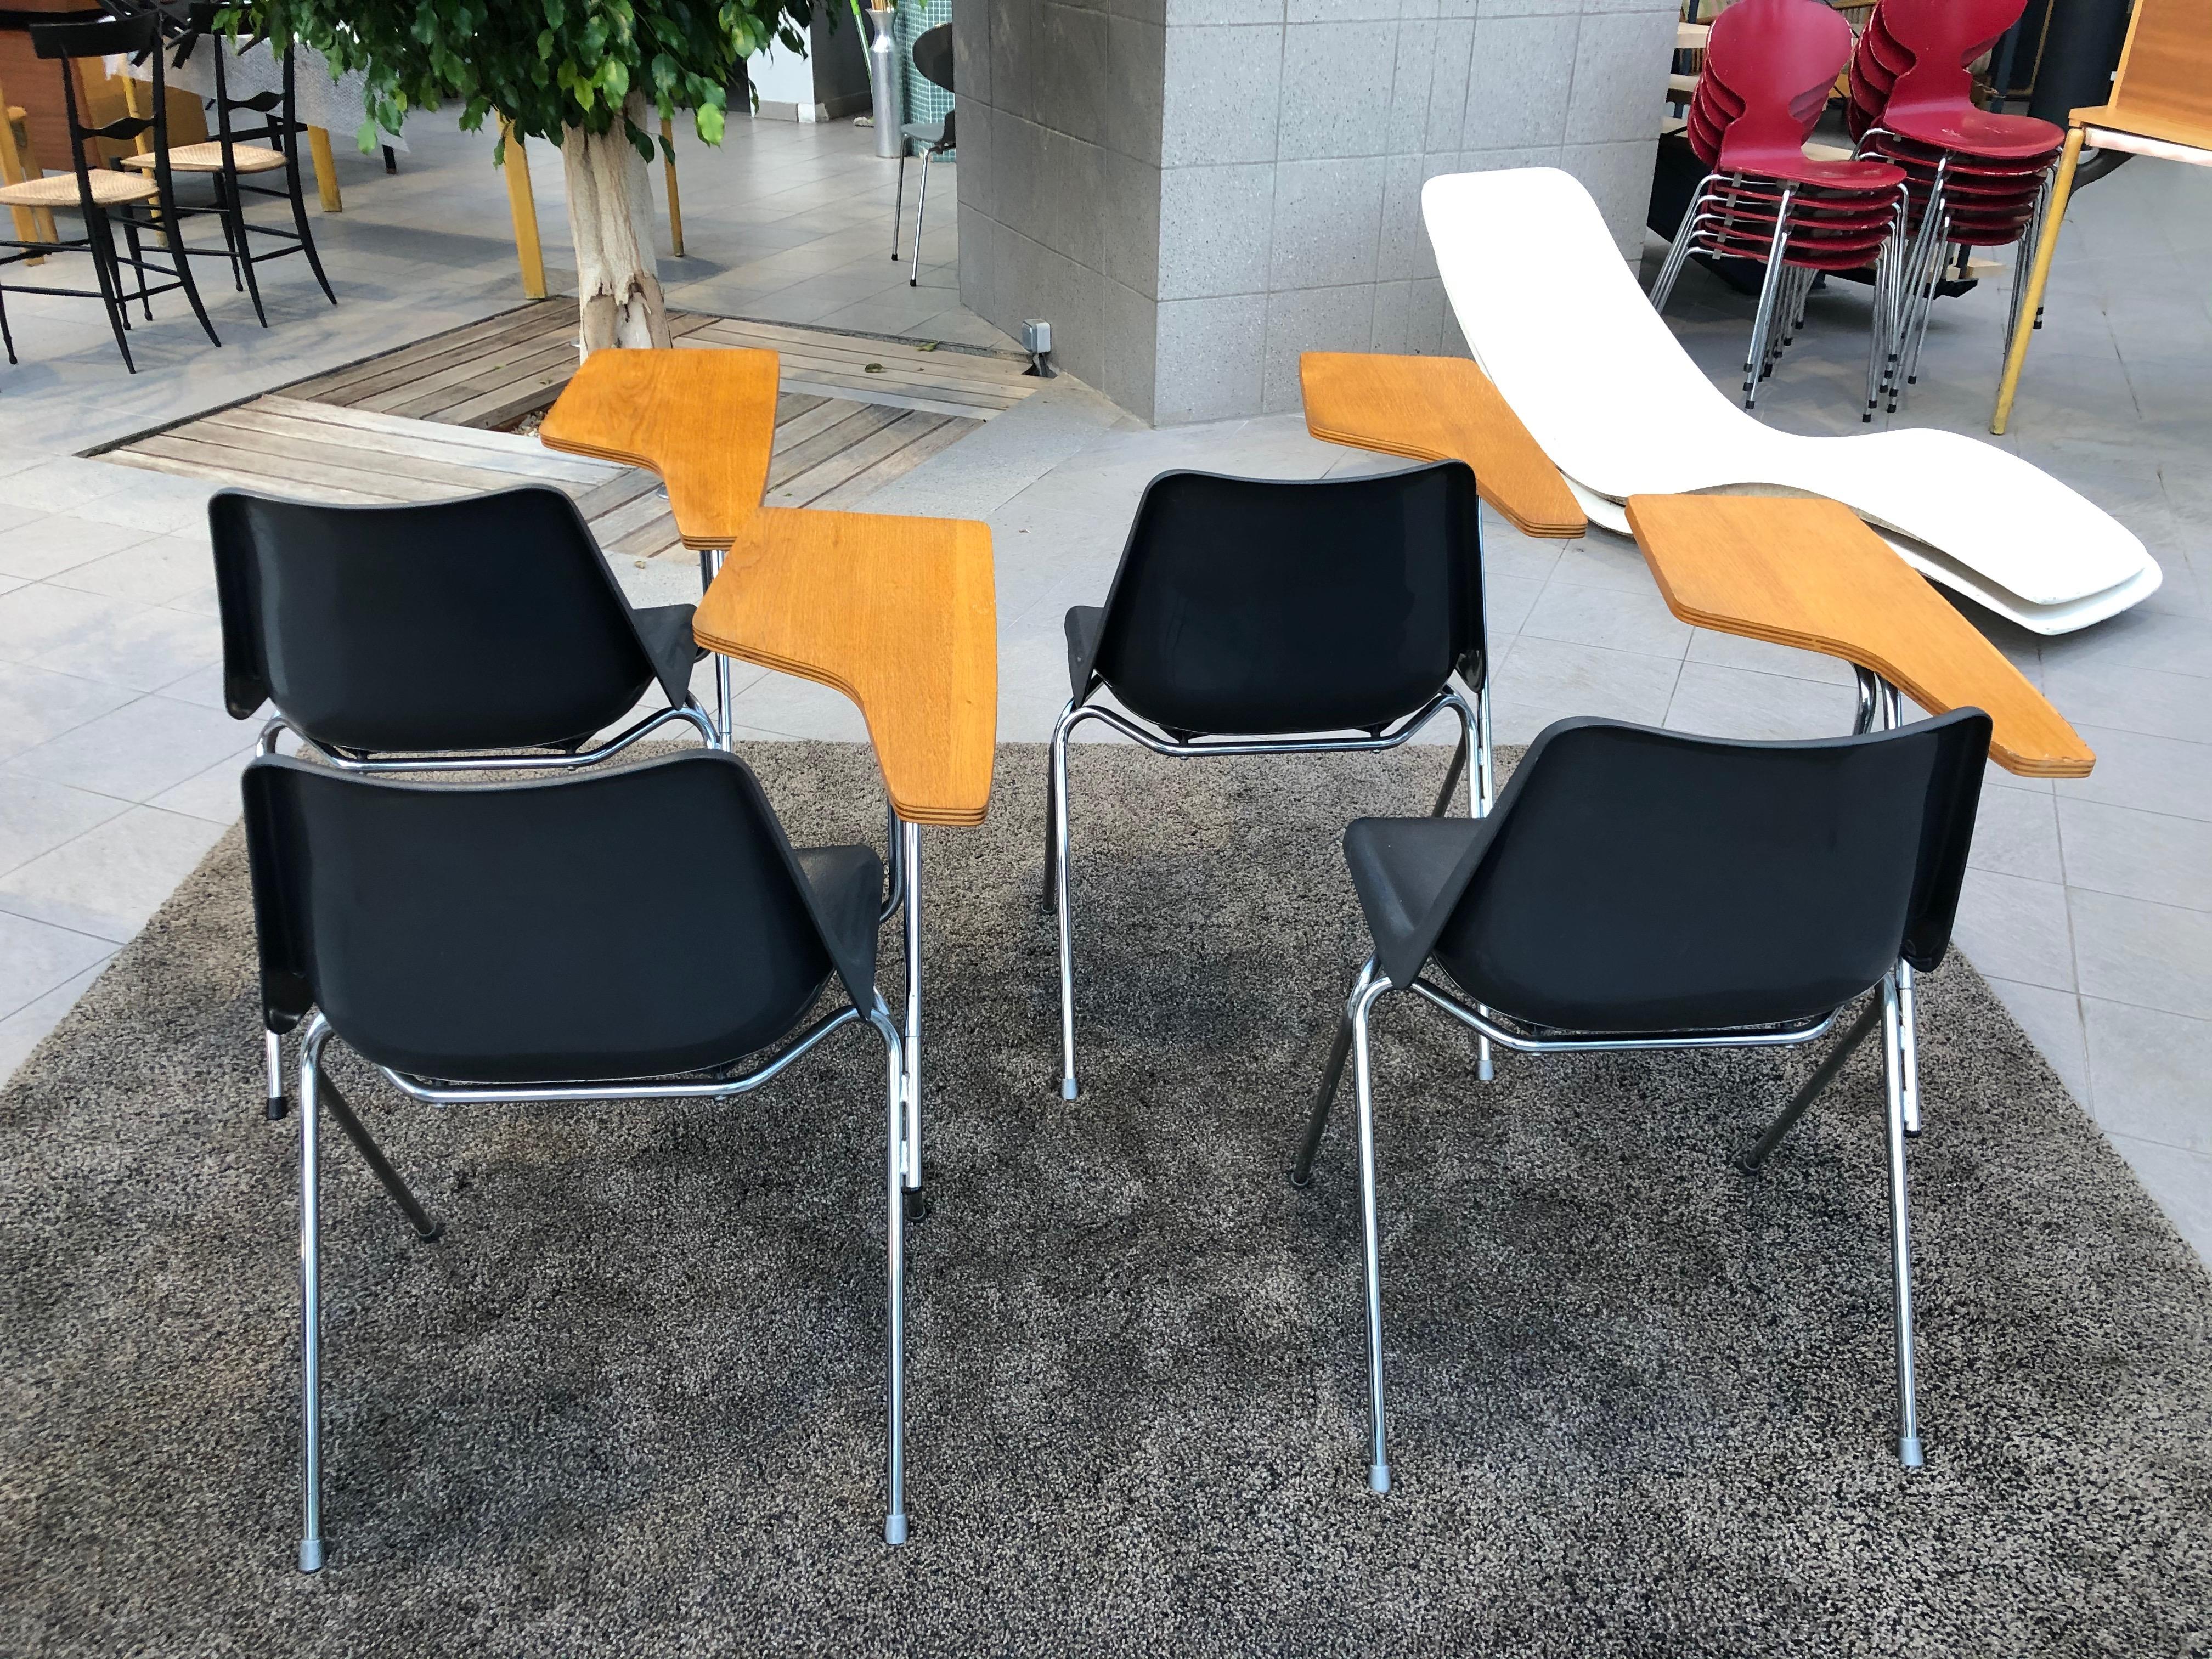 Suite of 4 stackable polypropylene conference chairs molded polypropylene shell - steel base by Robin Day for Hille 1963.
Possibility 8, 12 and 24.